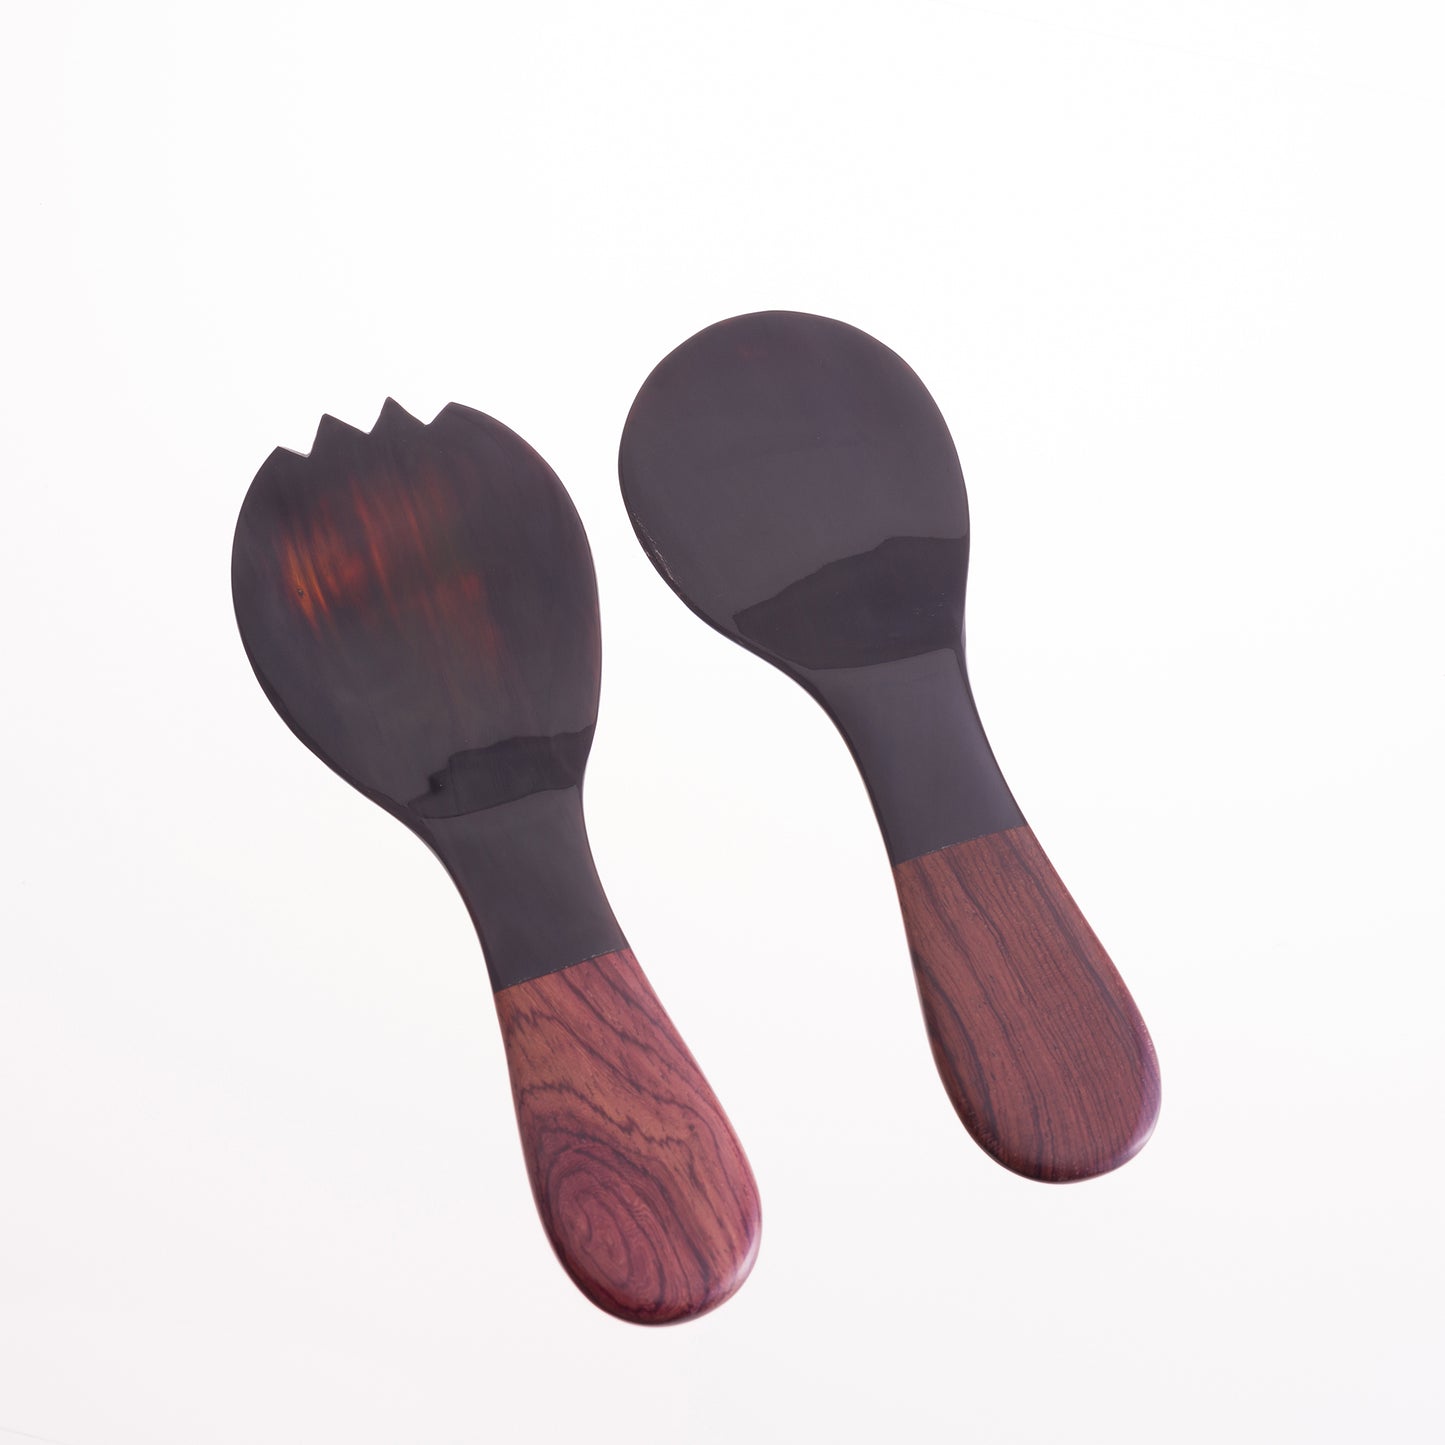 Boxed Black Horn Salad Servers with Rosewood Handles